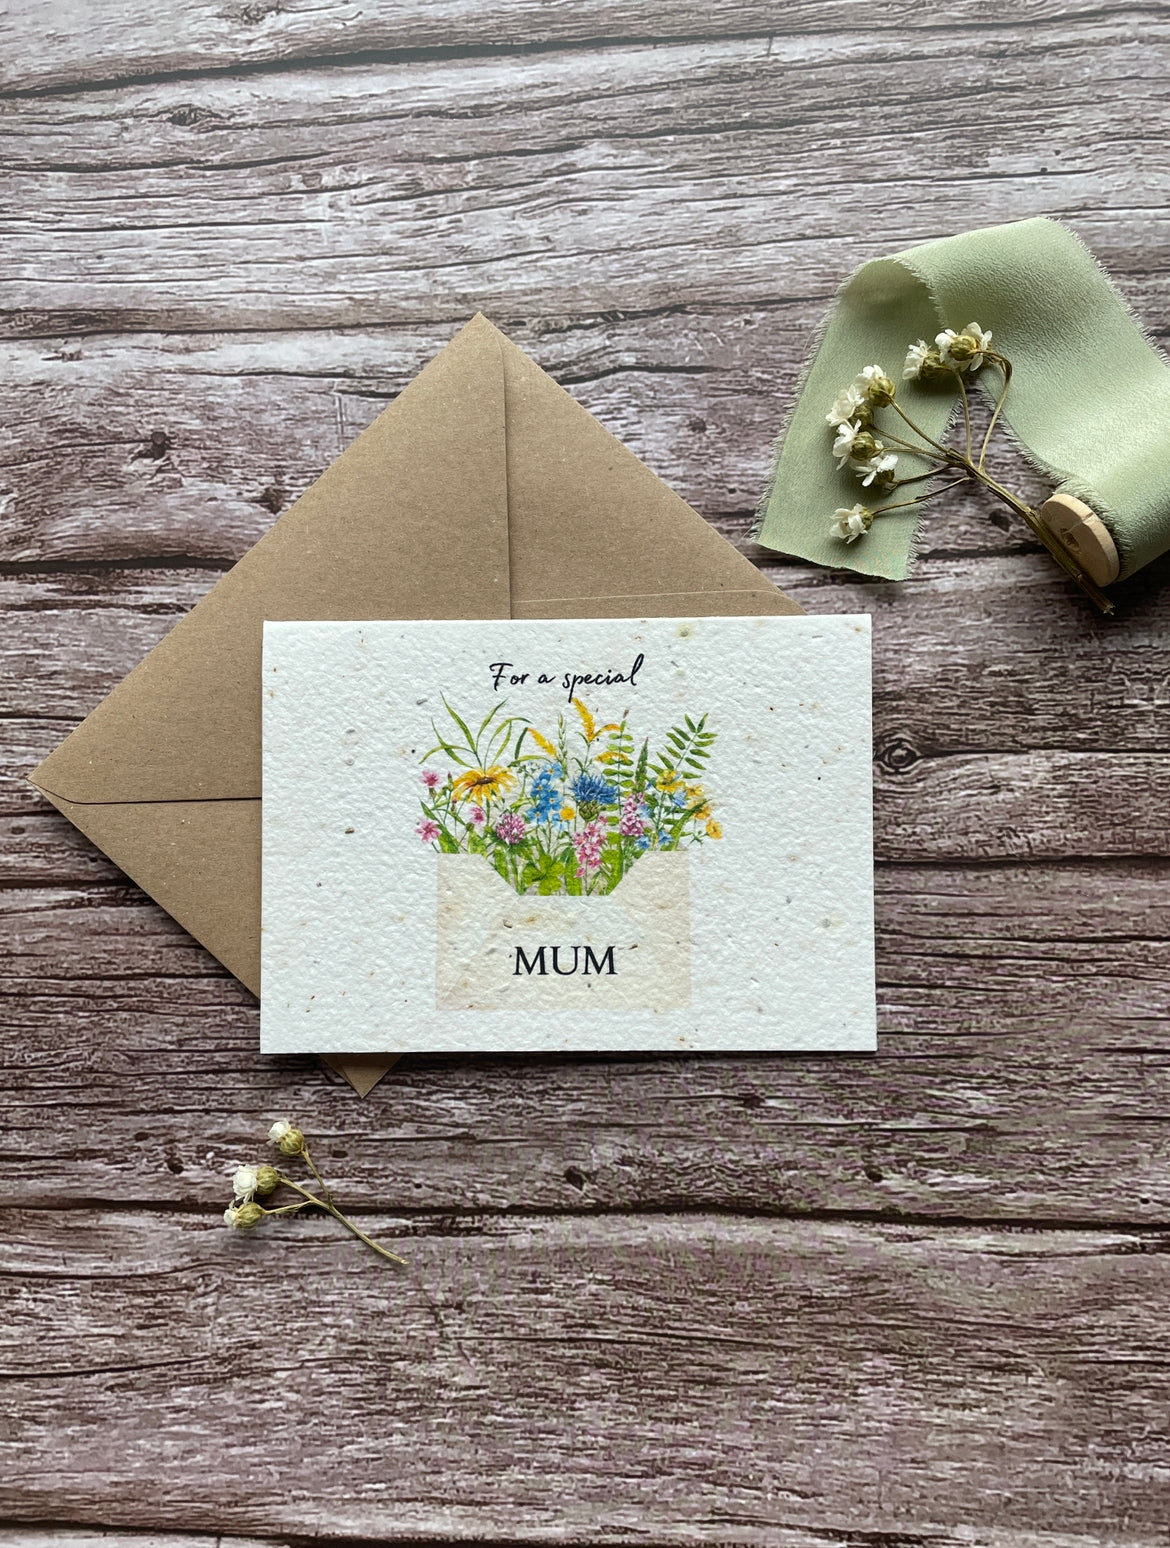 For a special Mum - Flowers in a Letter